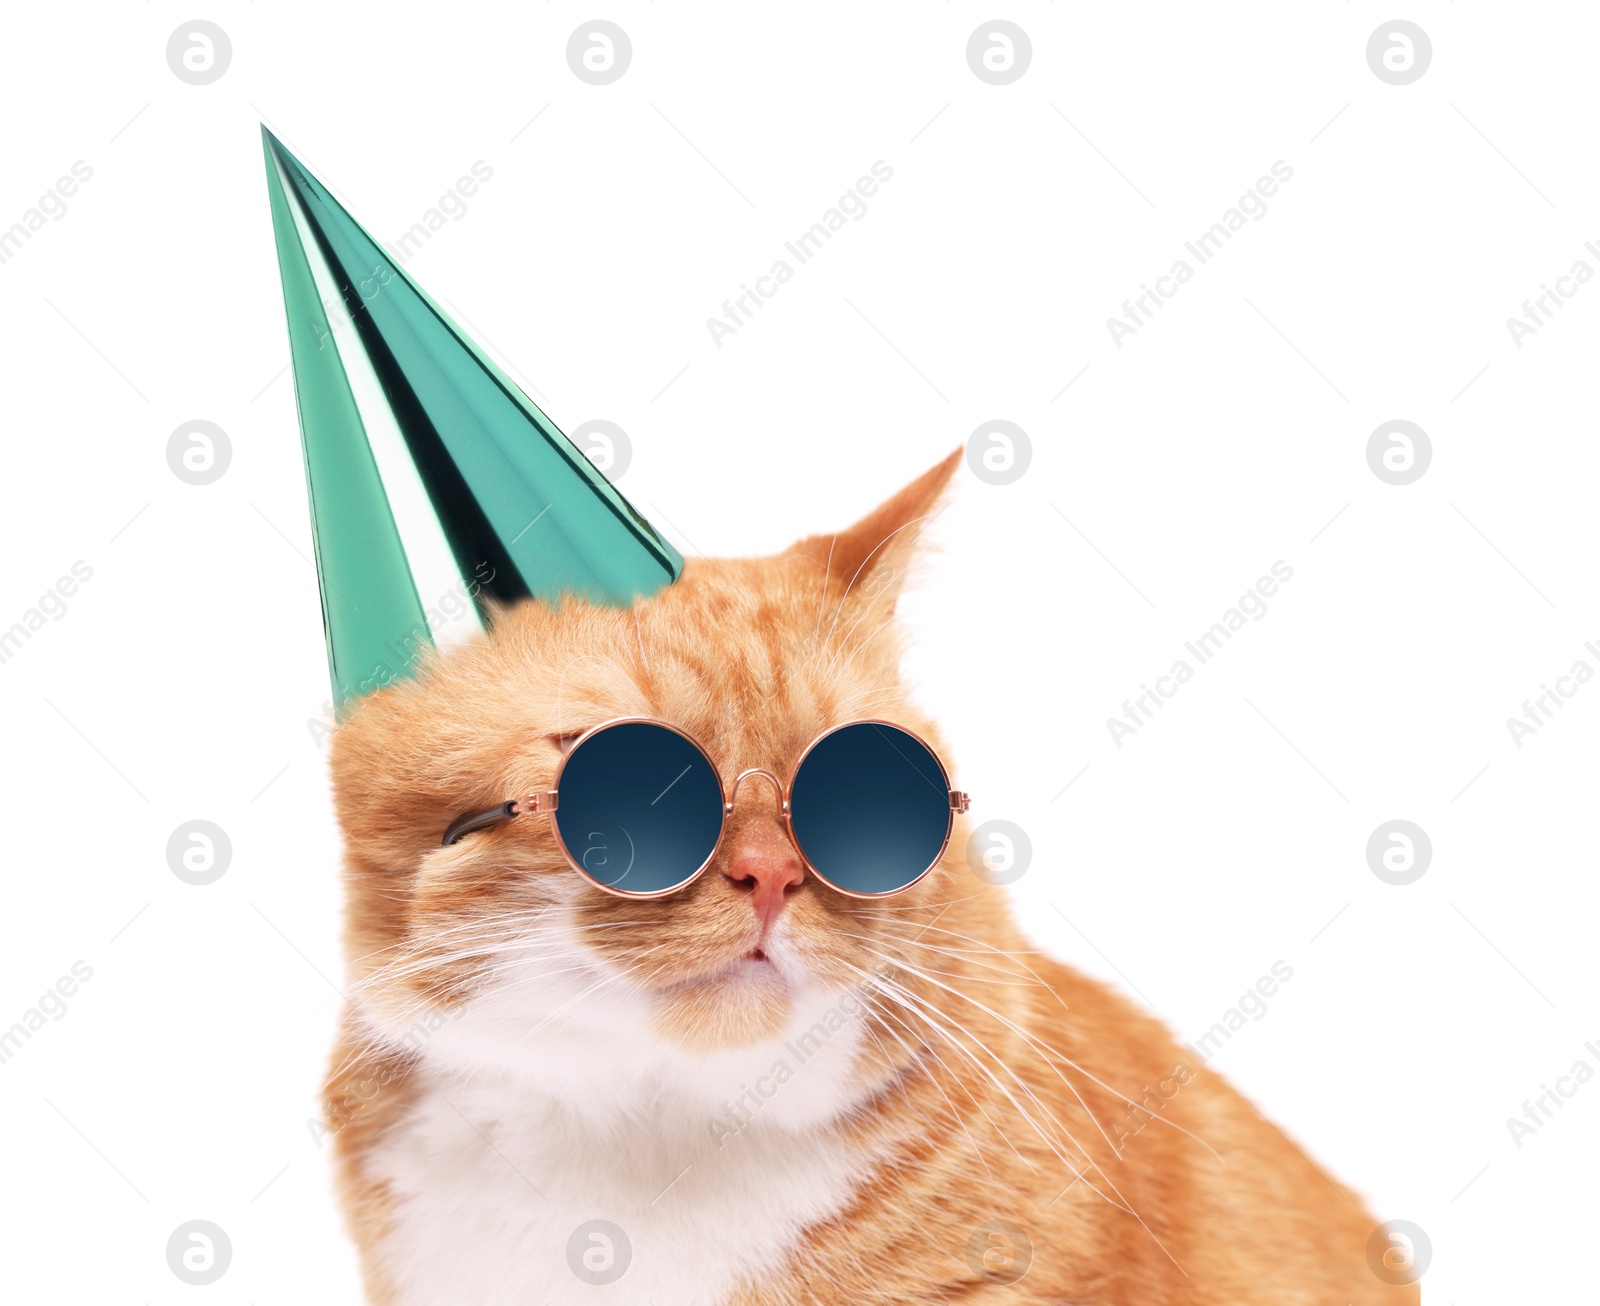 Image of Cute cat with party hat and sunglasses on white background